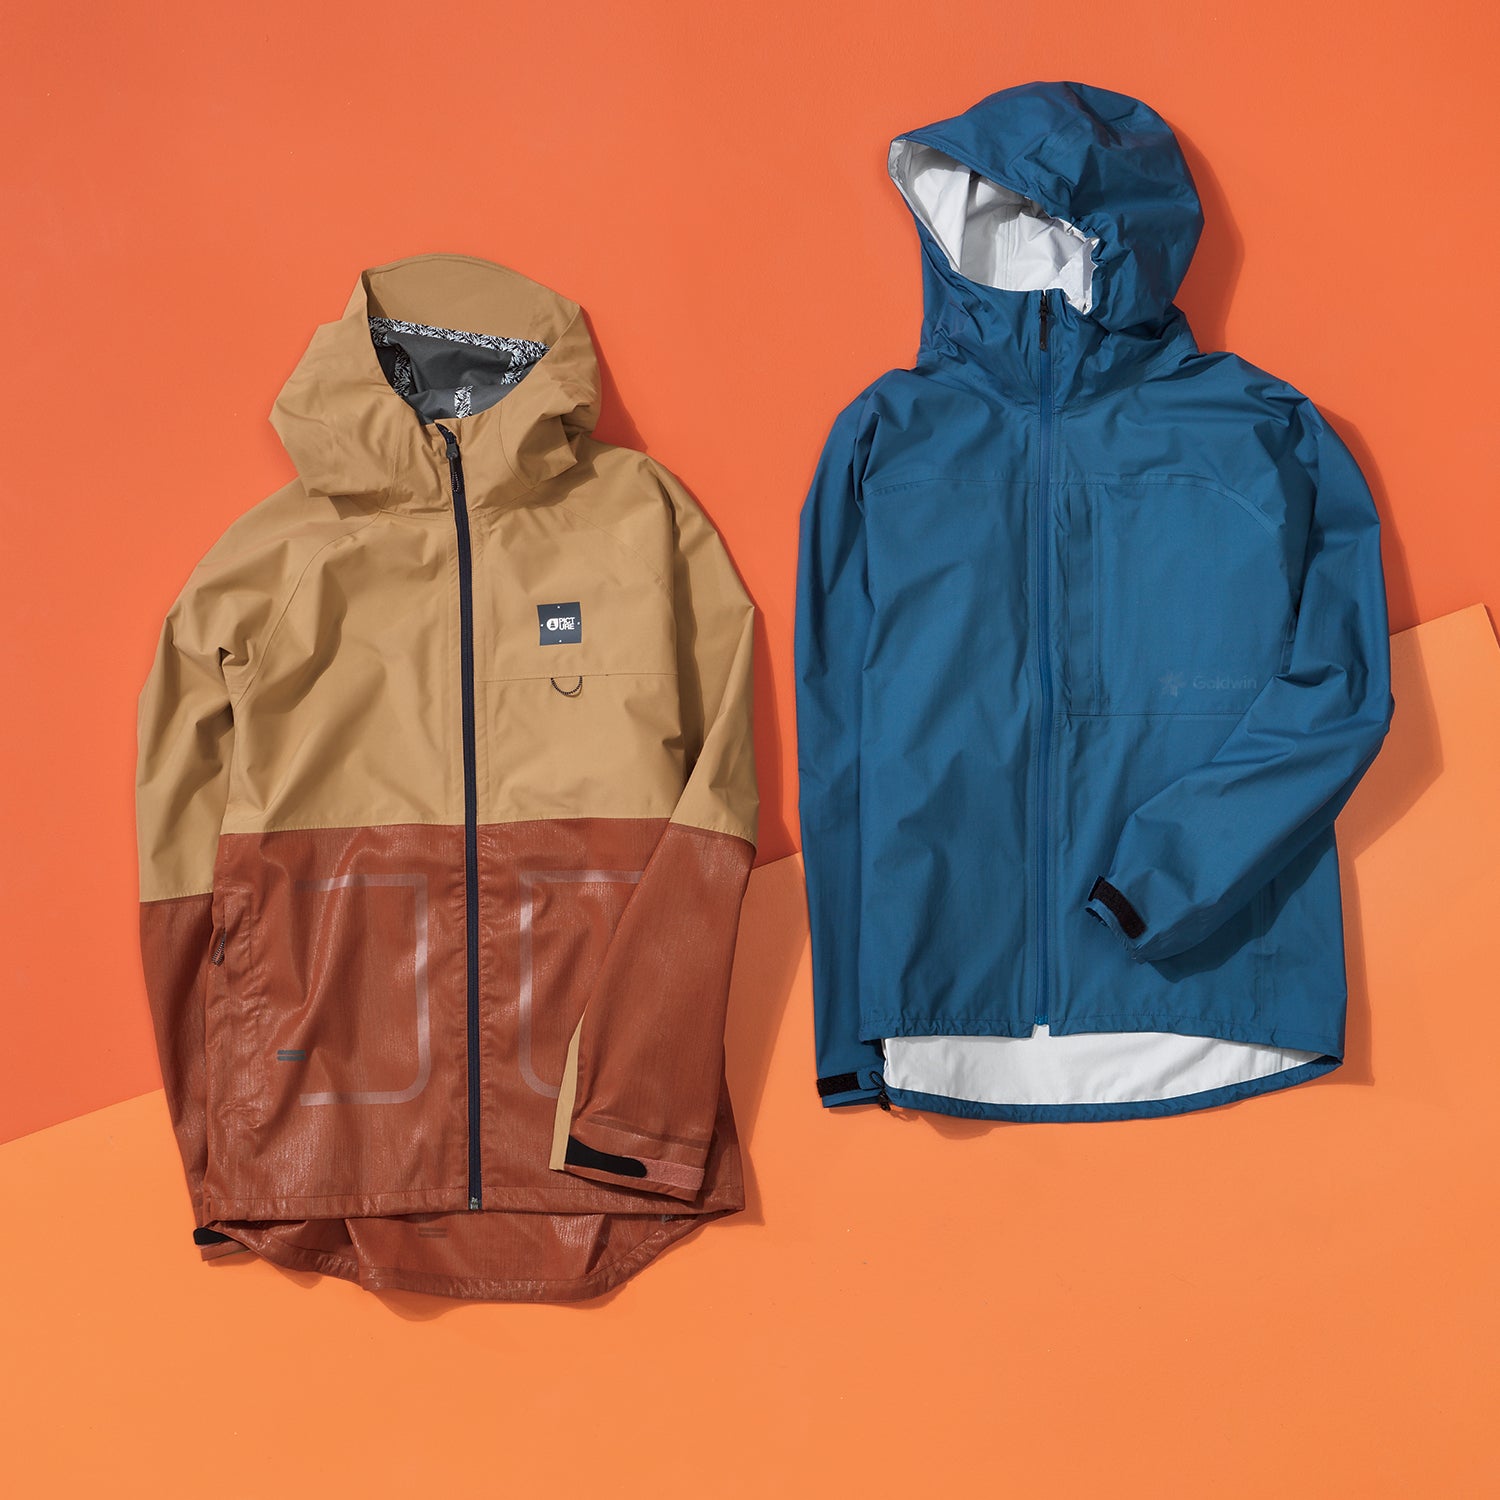 The Best Hard and Soft Jackets 2022 - Outside